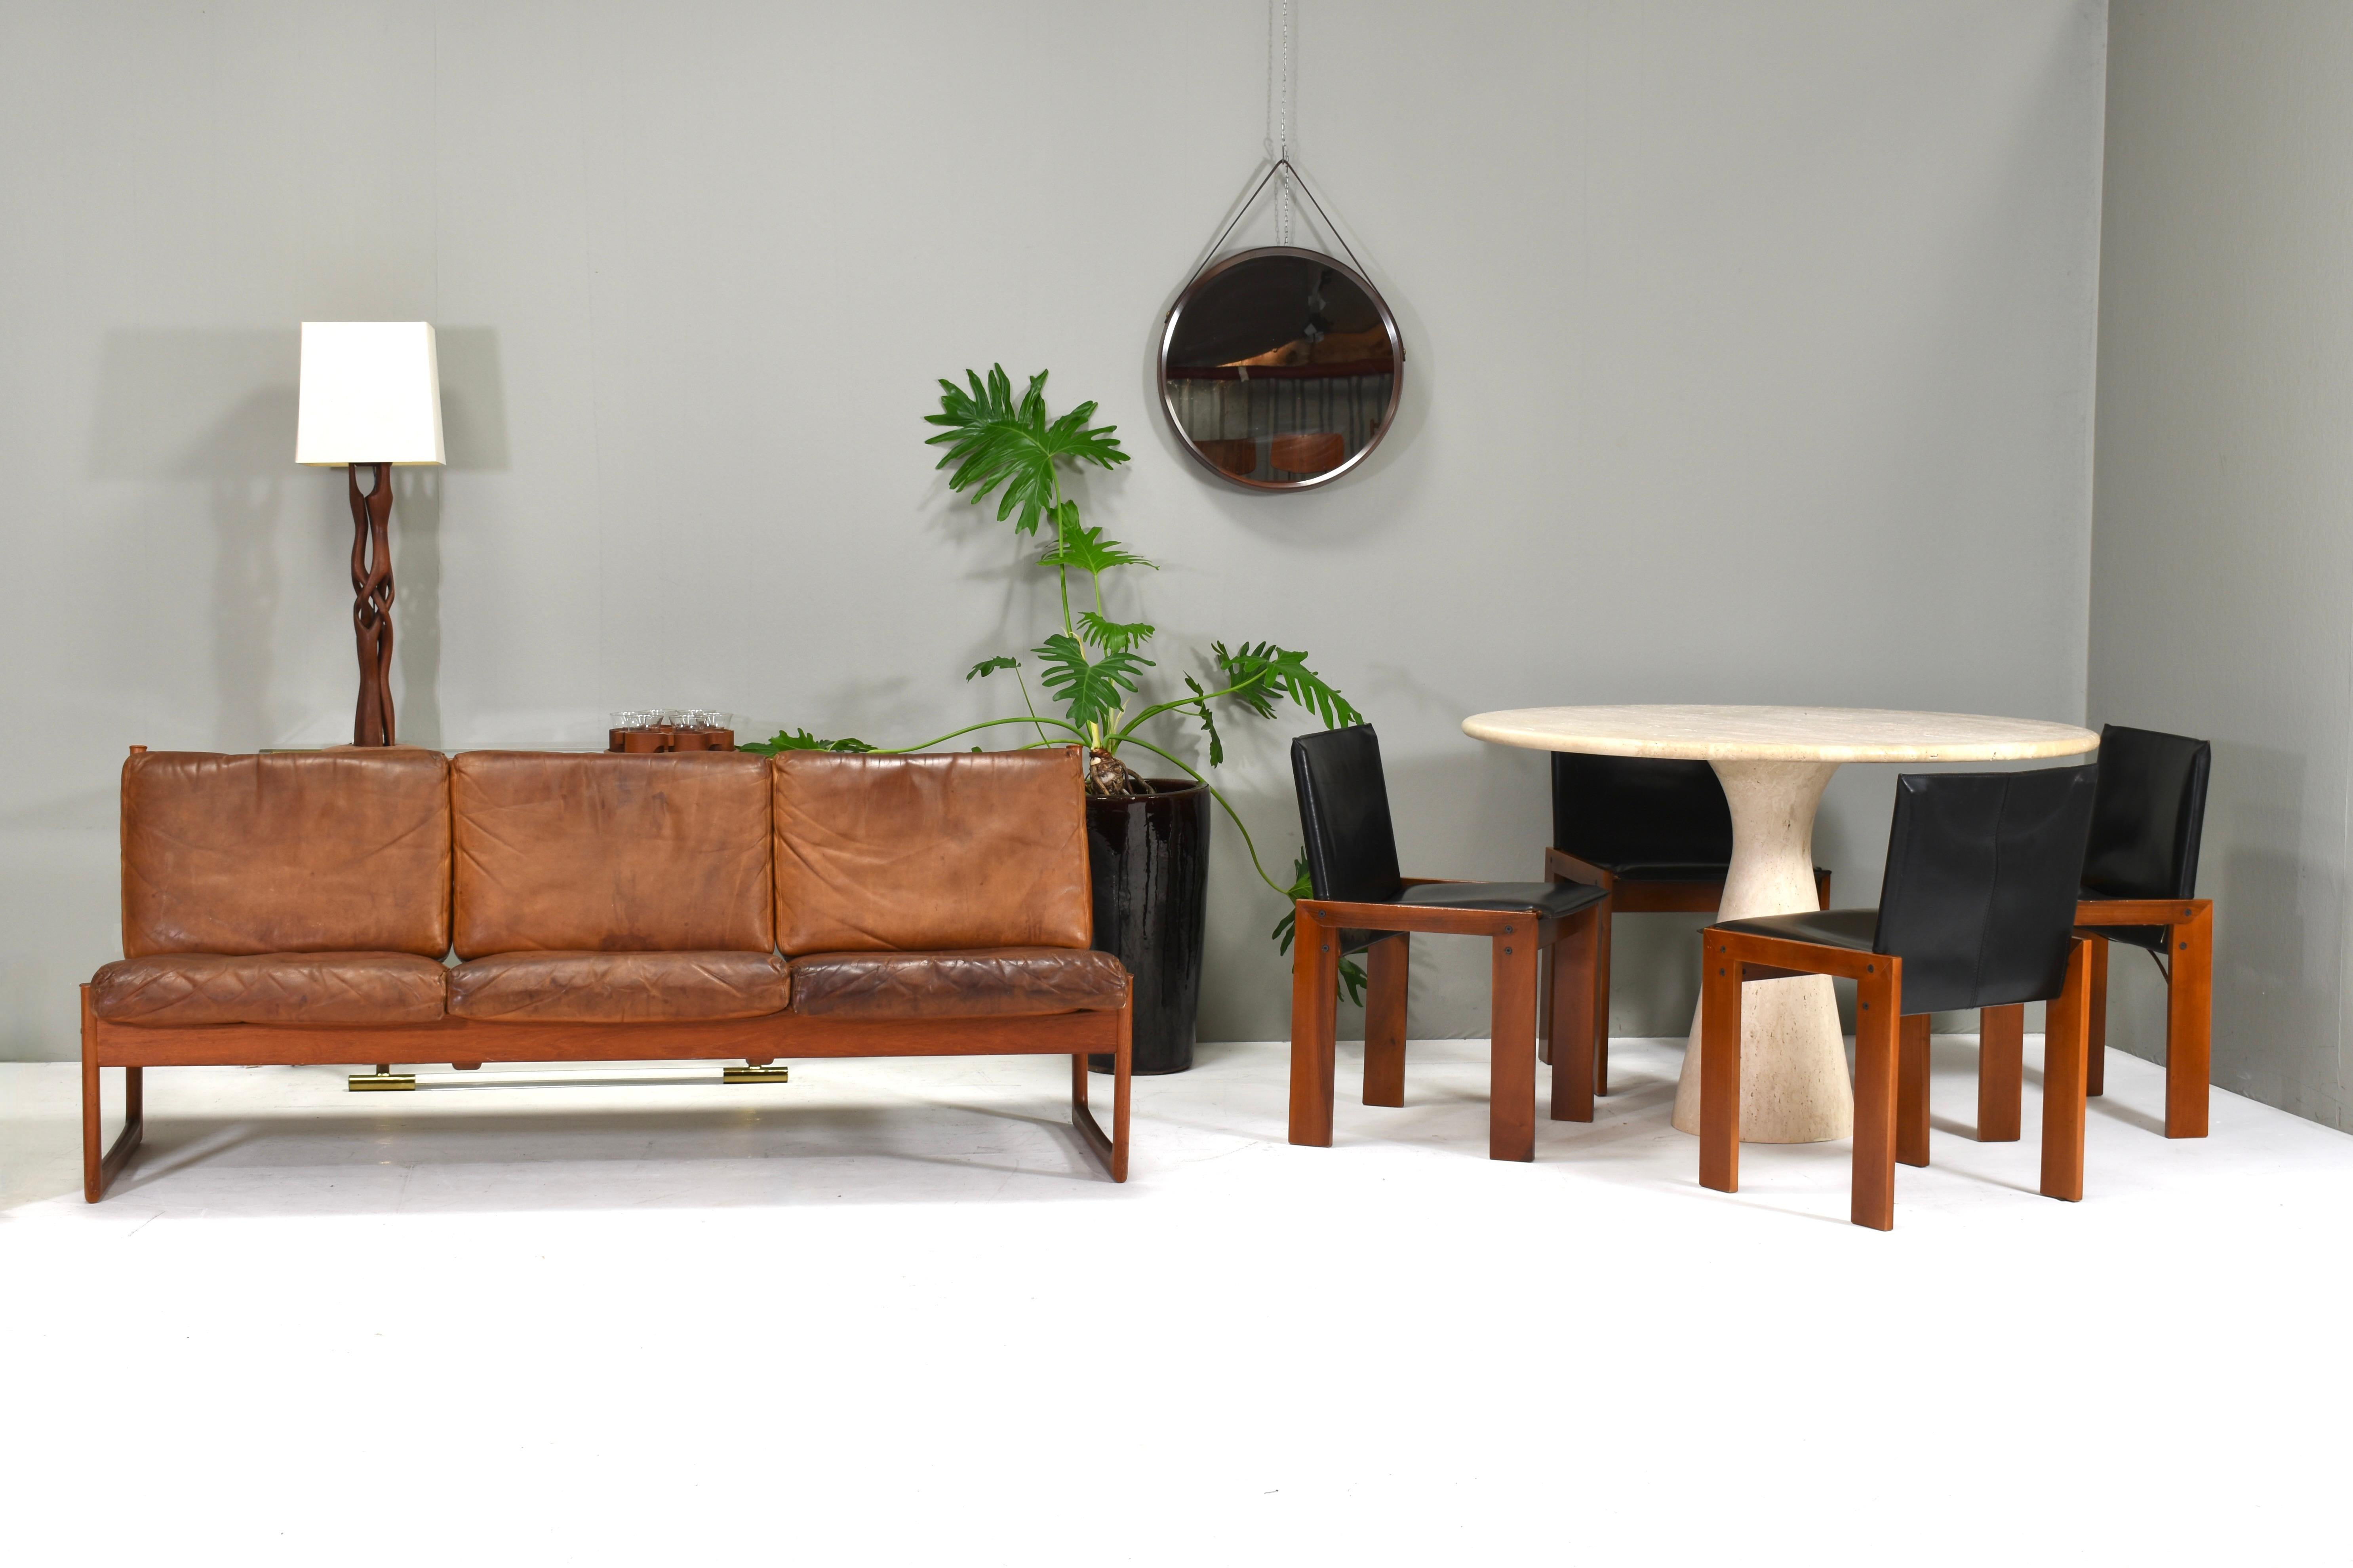 Amazing minimalistic solid Teak and Cognac leather sofa model FD130 by Peter Hvidt & Orla Mølgaard-Nielsen for France and Søn – Denmark, circa 1960. The leather has a lot of patina and character. 

Designer: Peter Hvidt & Orla